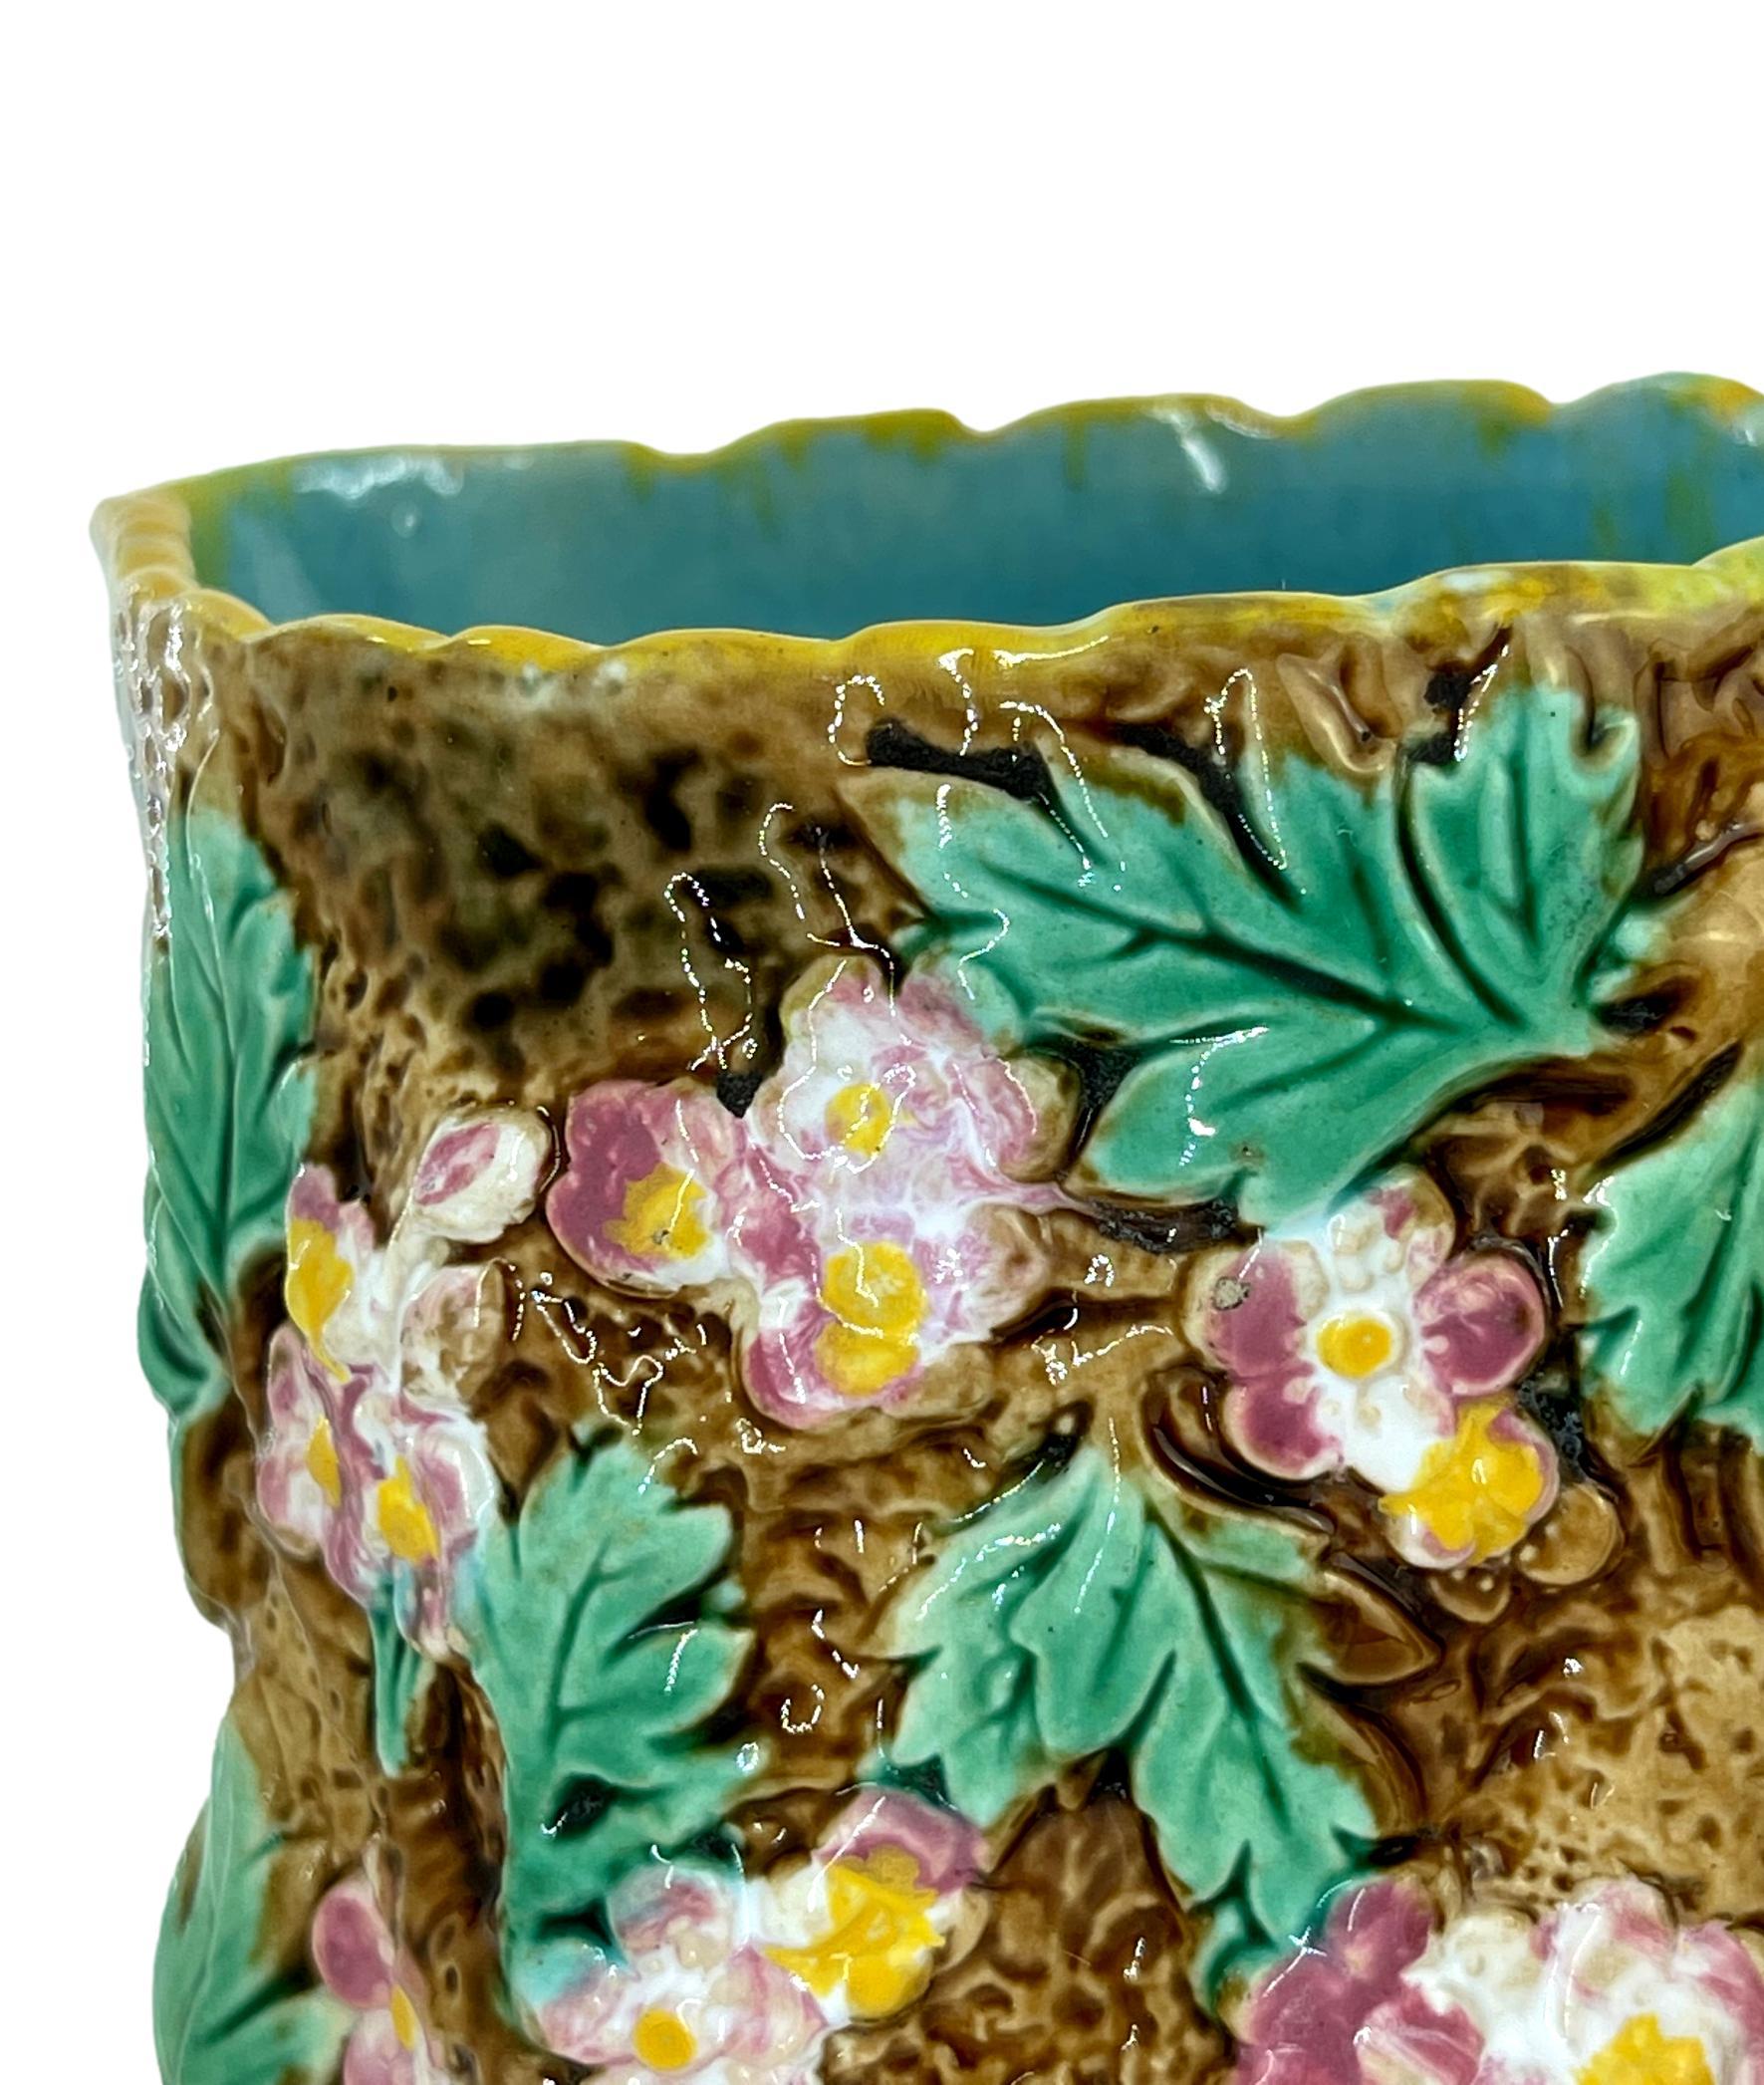 George Jones Majolica Pitcher Molded as a Hawthorn Tree, English, ca. 1875 For Sale 4